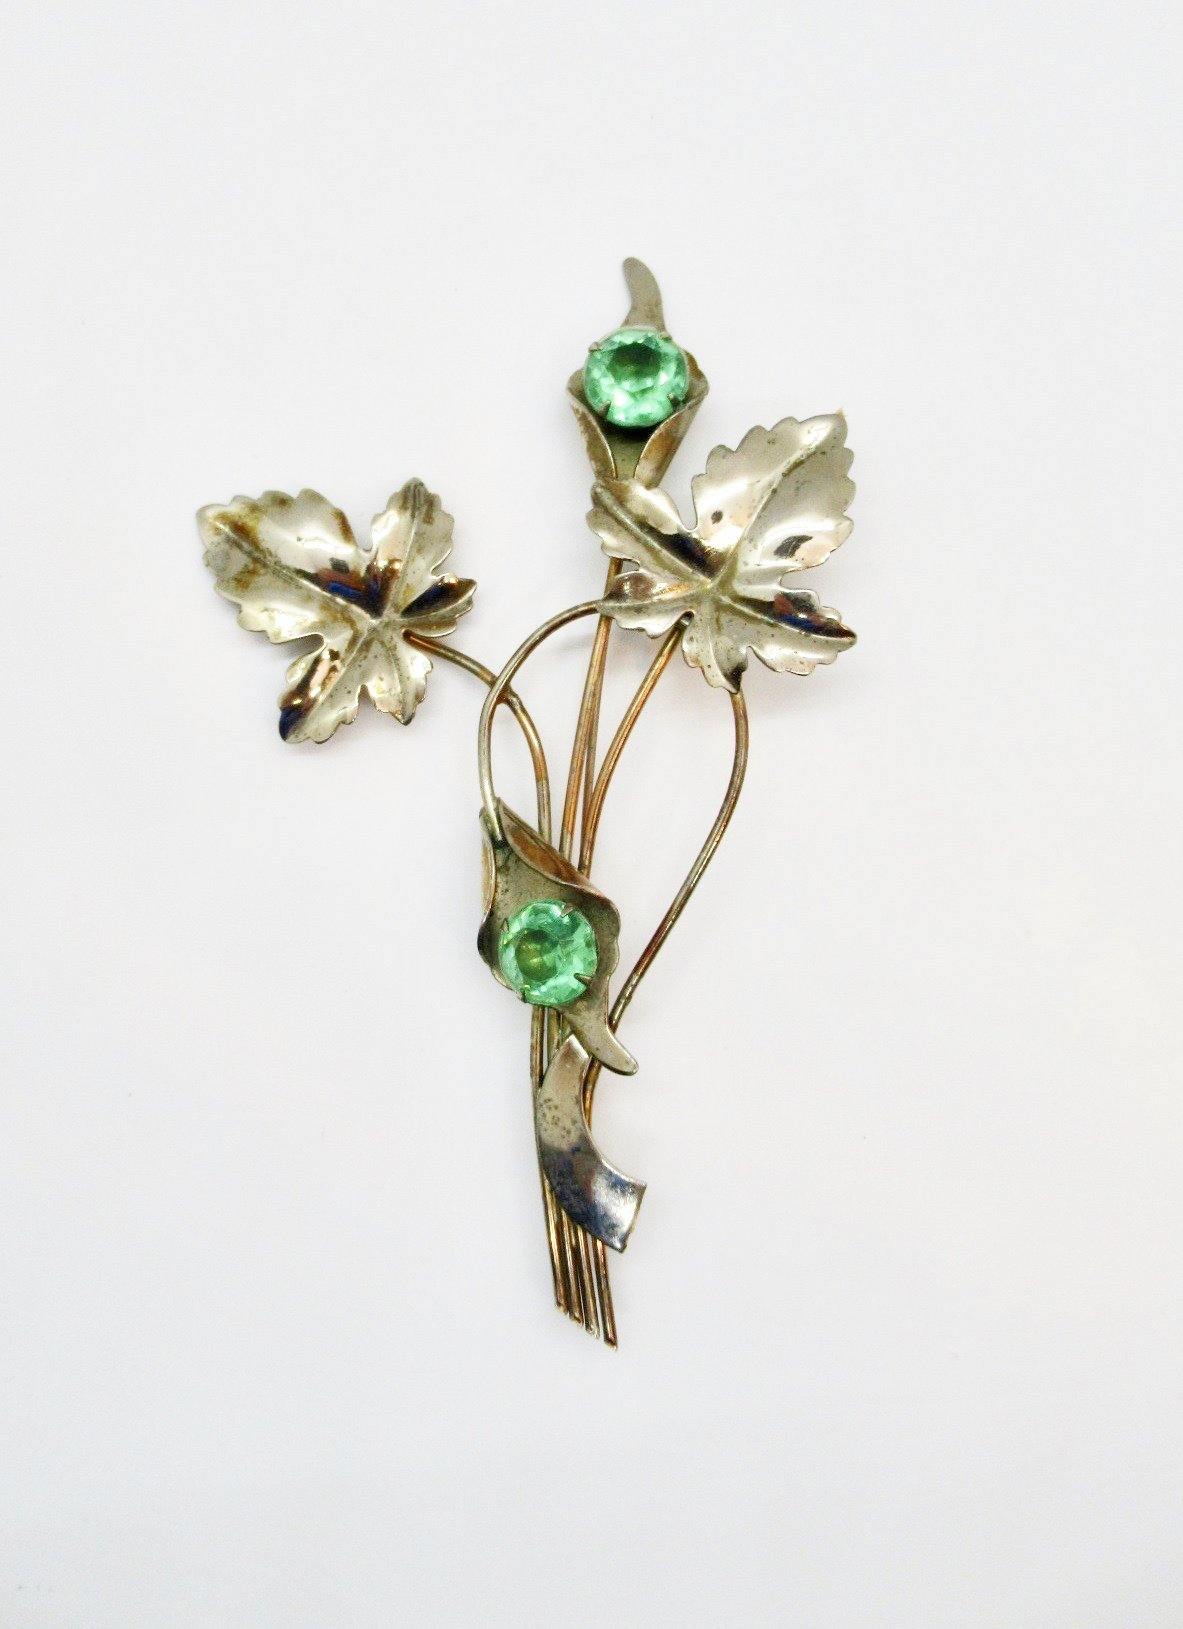 Vintage 4.25" Tall Leafy Floral Pin with Green Stones - Lamoree’s Vintage